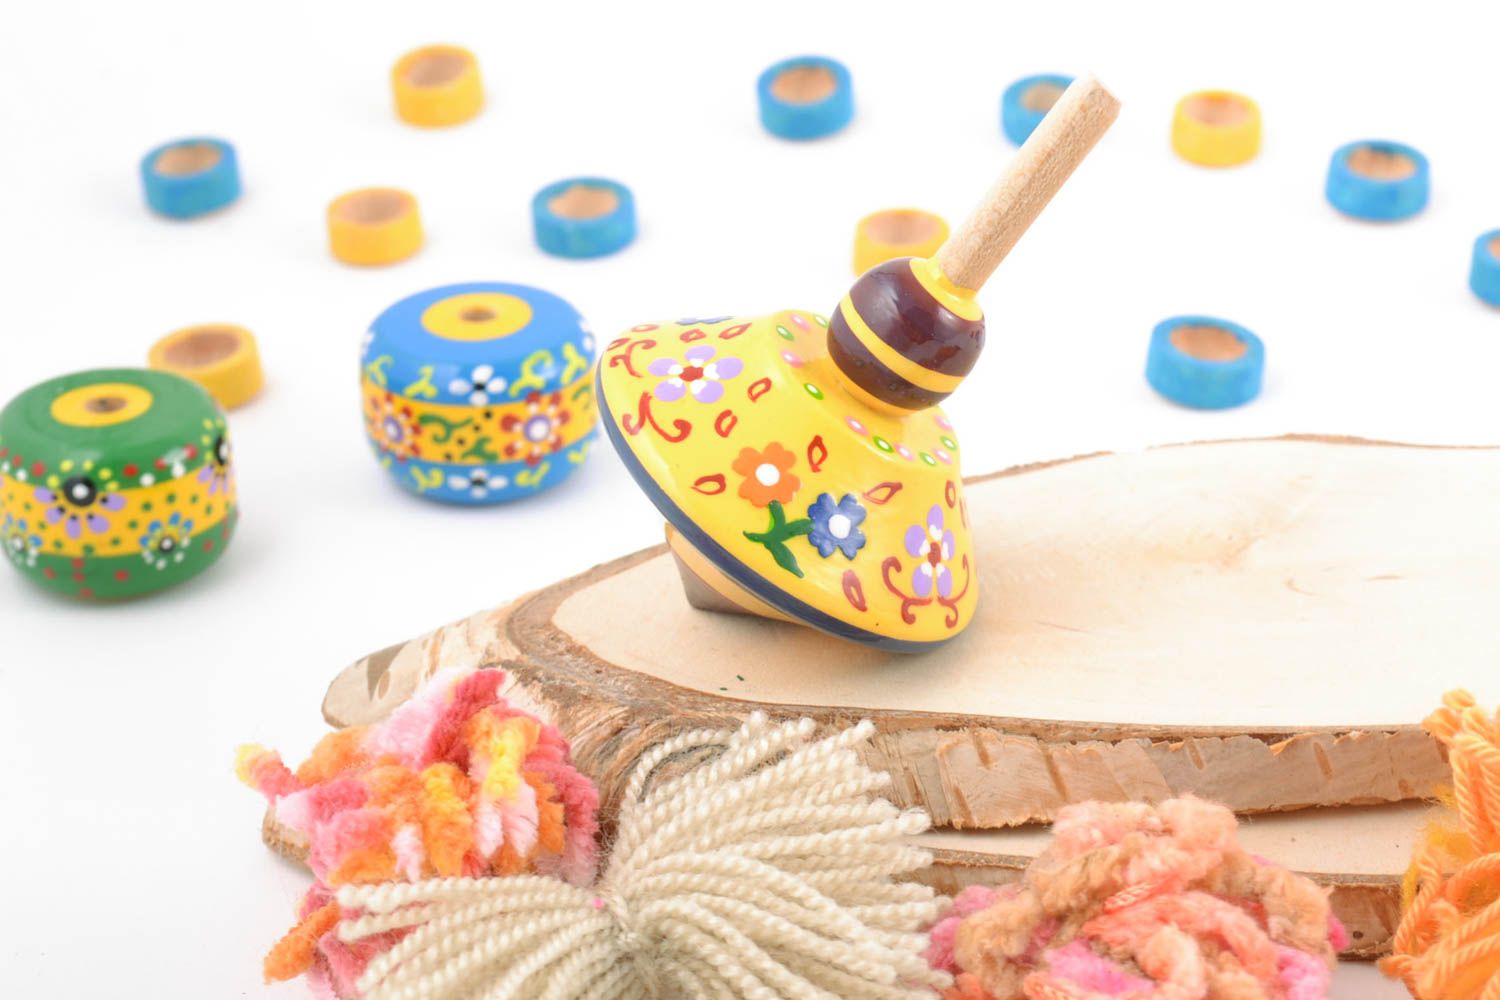 Handmade small painted with eco dyes wooden yellow spinning top toy for kids photo 1